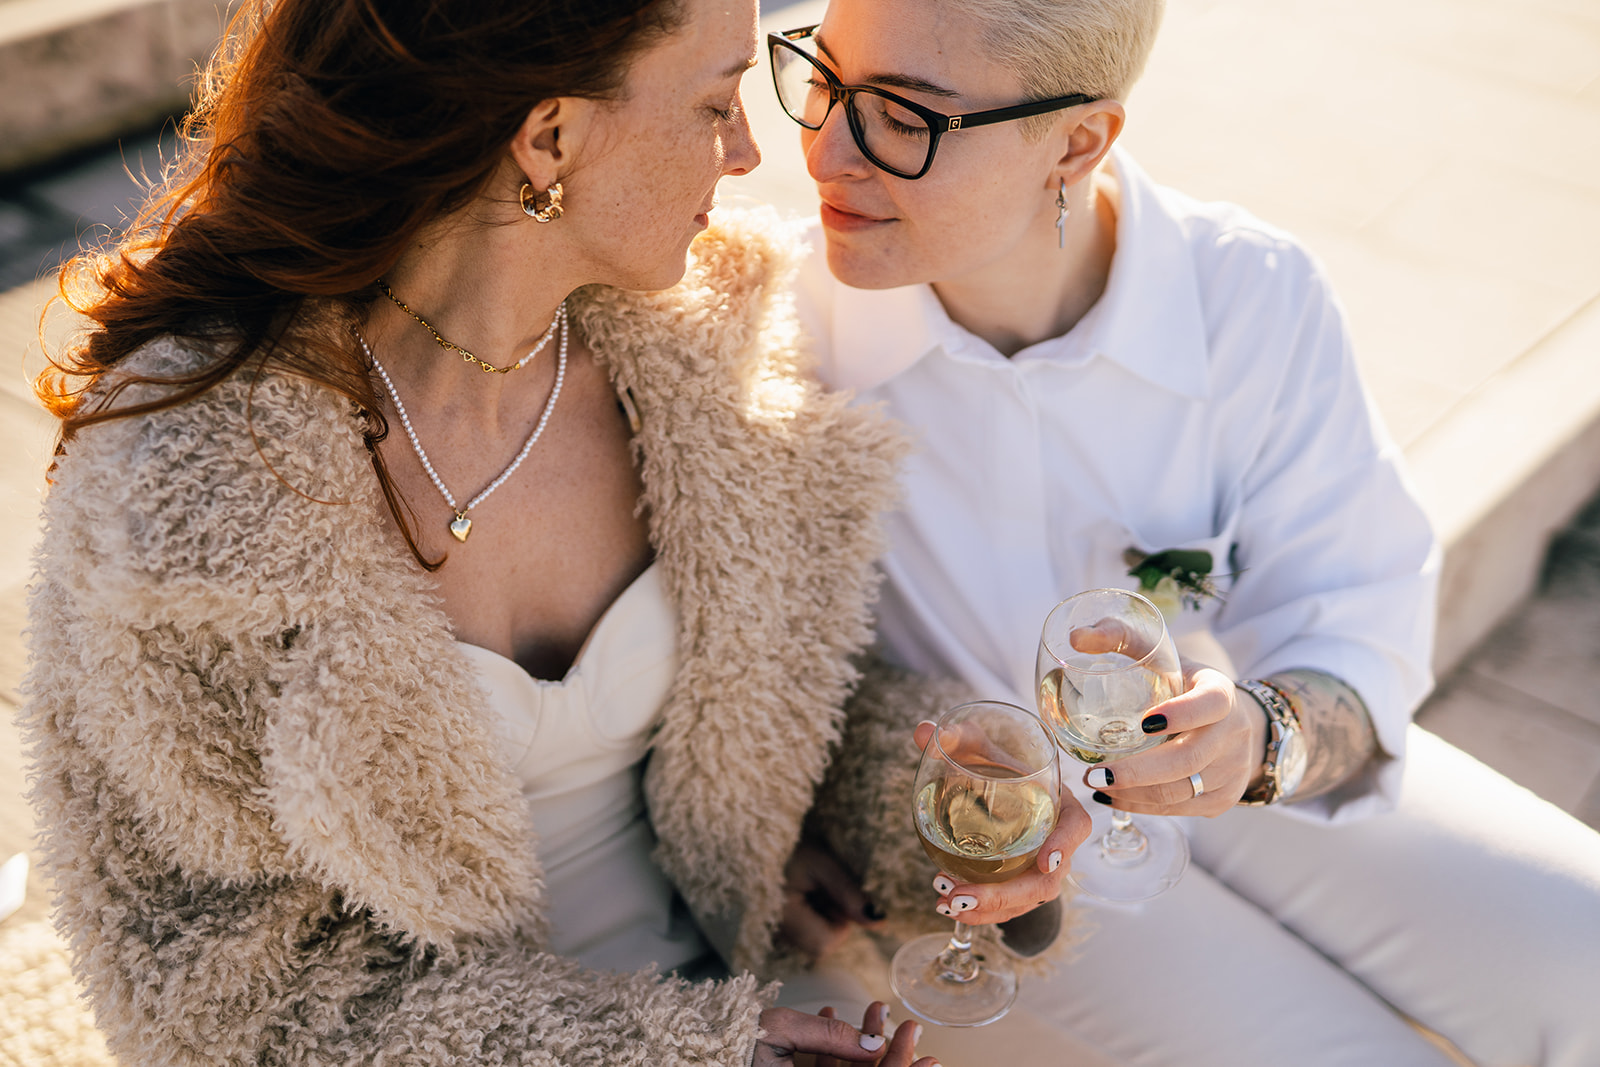 two brides drink a glass of white wine in Lisbon on their elopement day in the winter sun